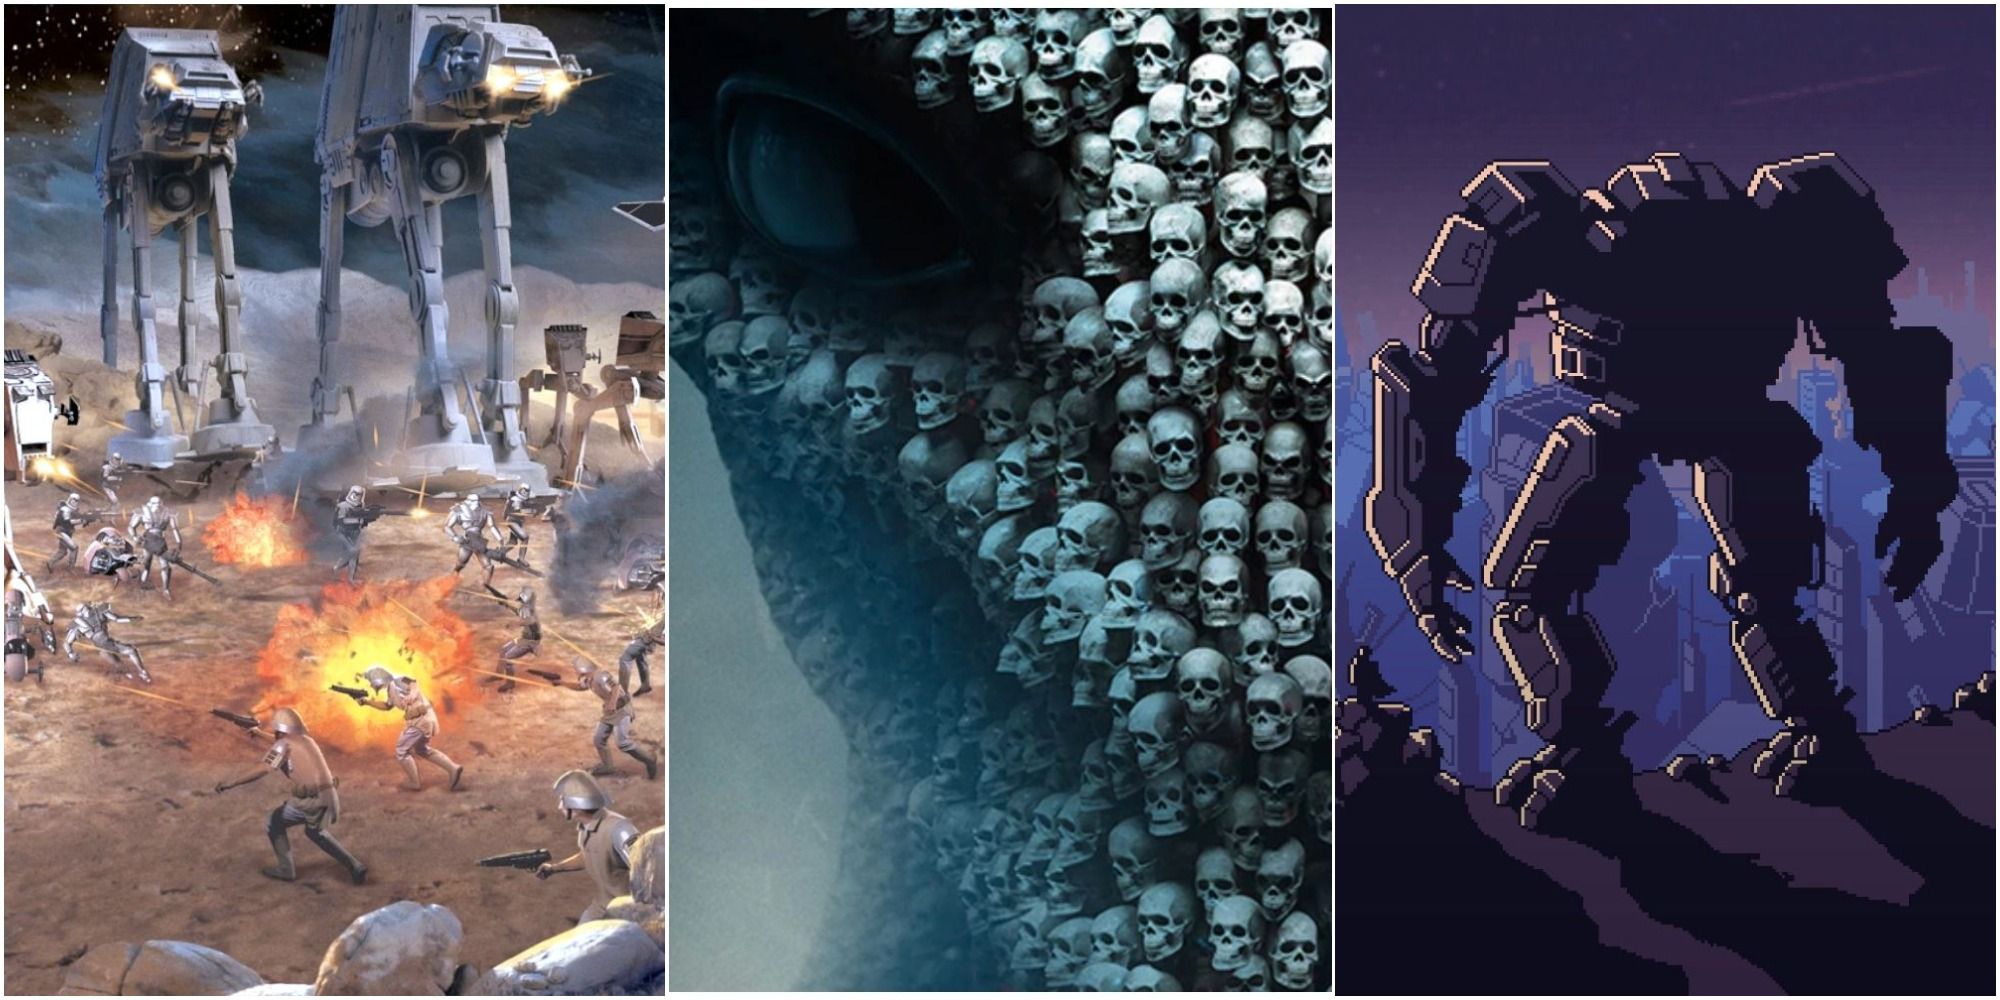 Artwork for Star Wars Empire at war of AT-ATs attacking rebels, the xcom 2 cover of an alien head made from skulls, and a mech from Into The Breach standing over a cliff, left to right